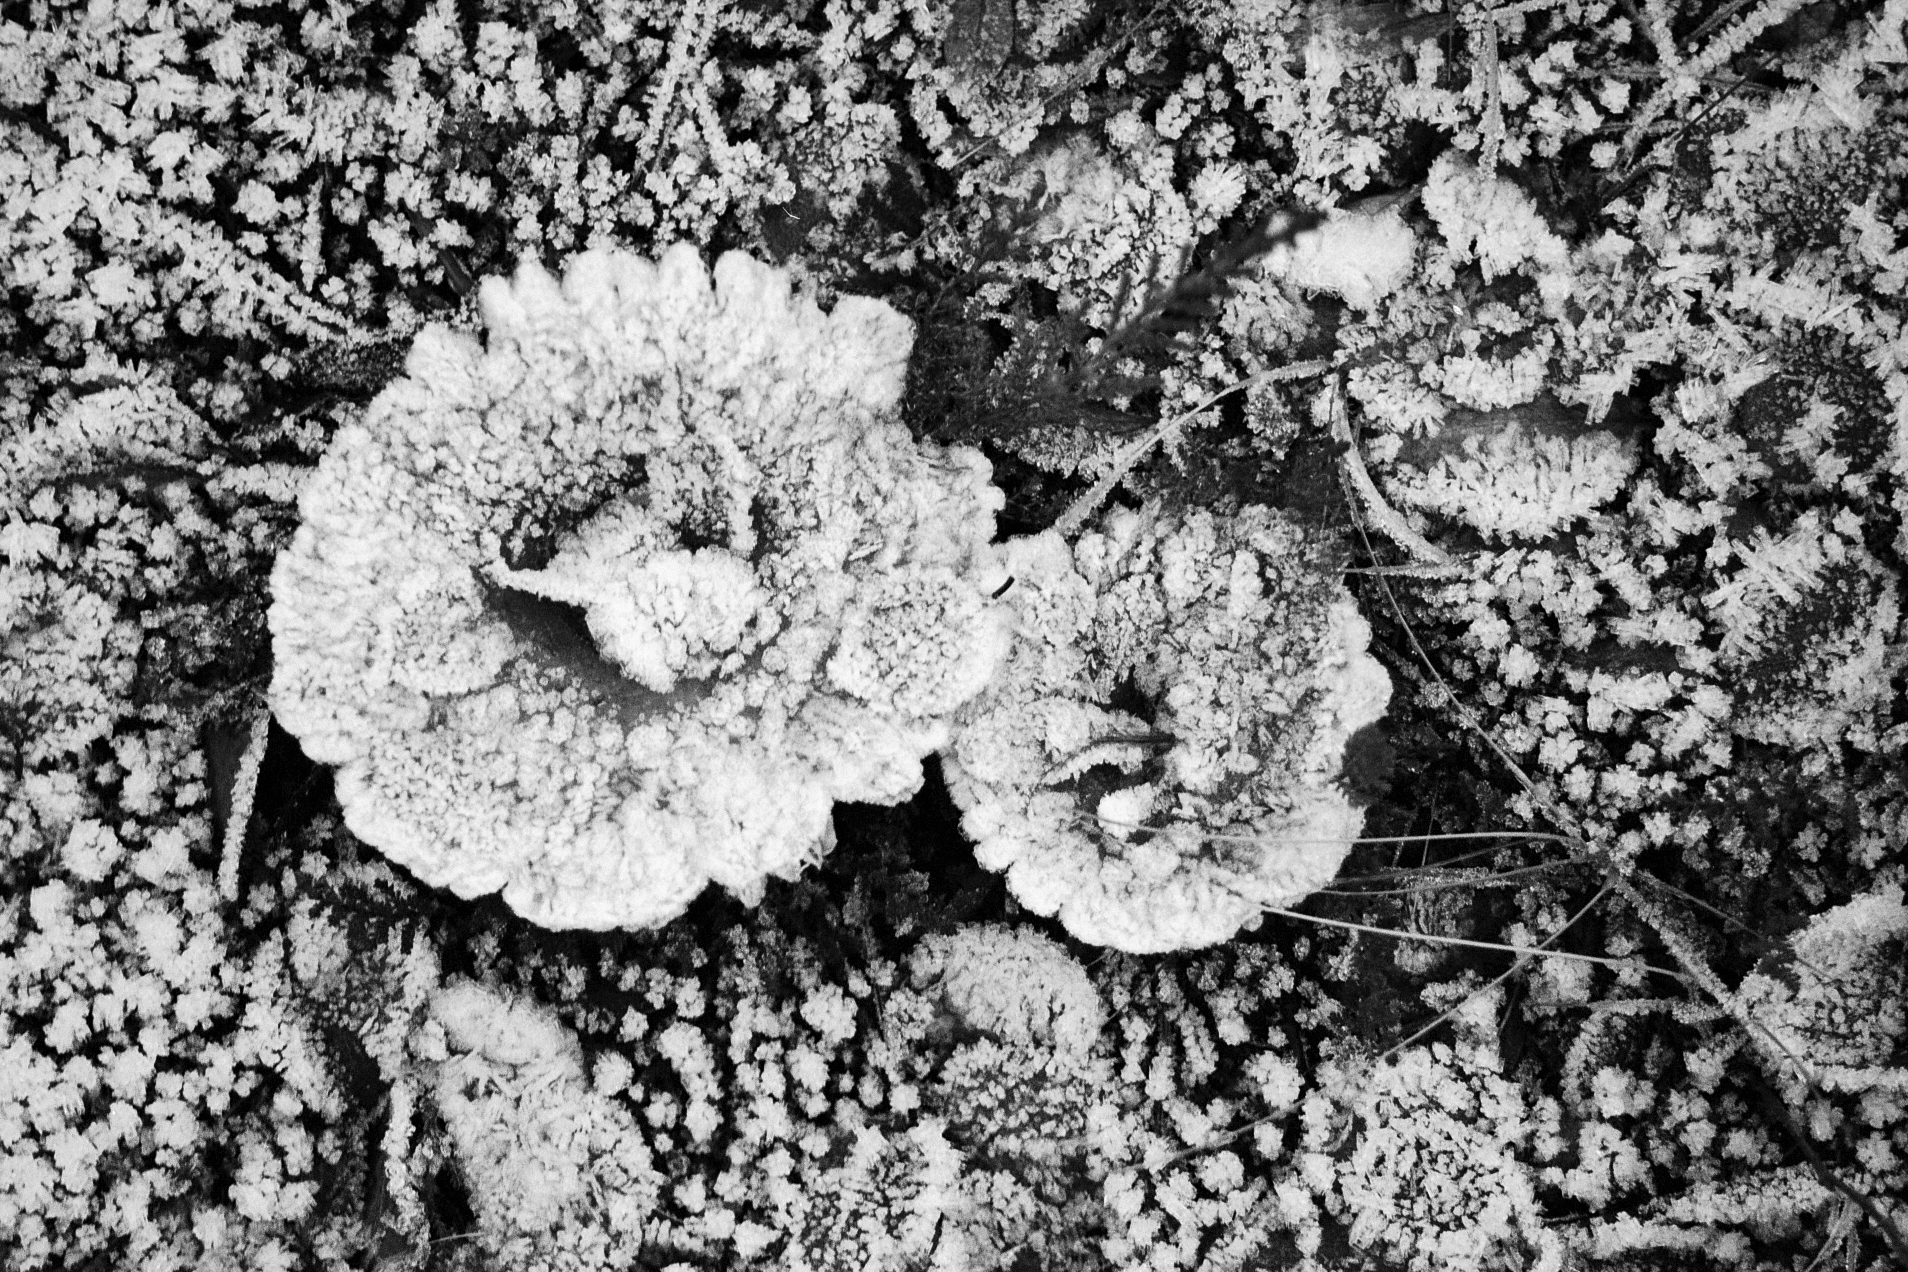  Frost roses on a wild fungus